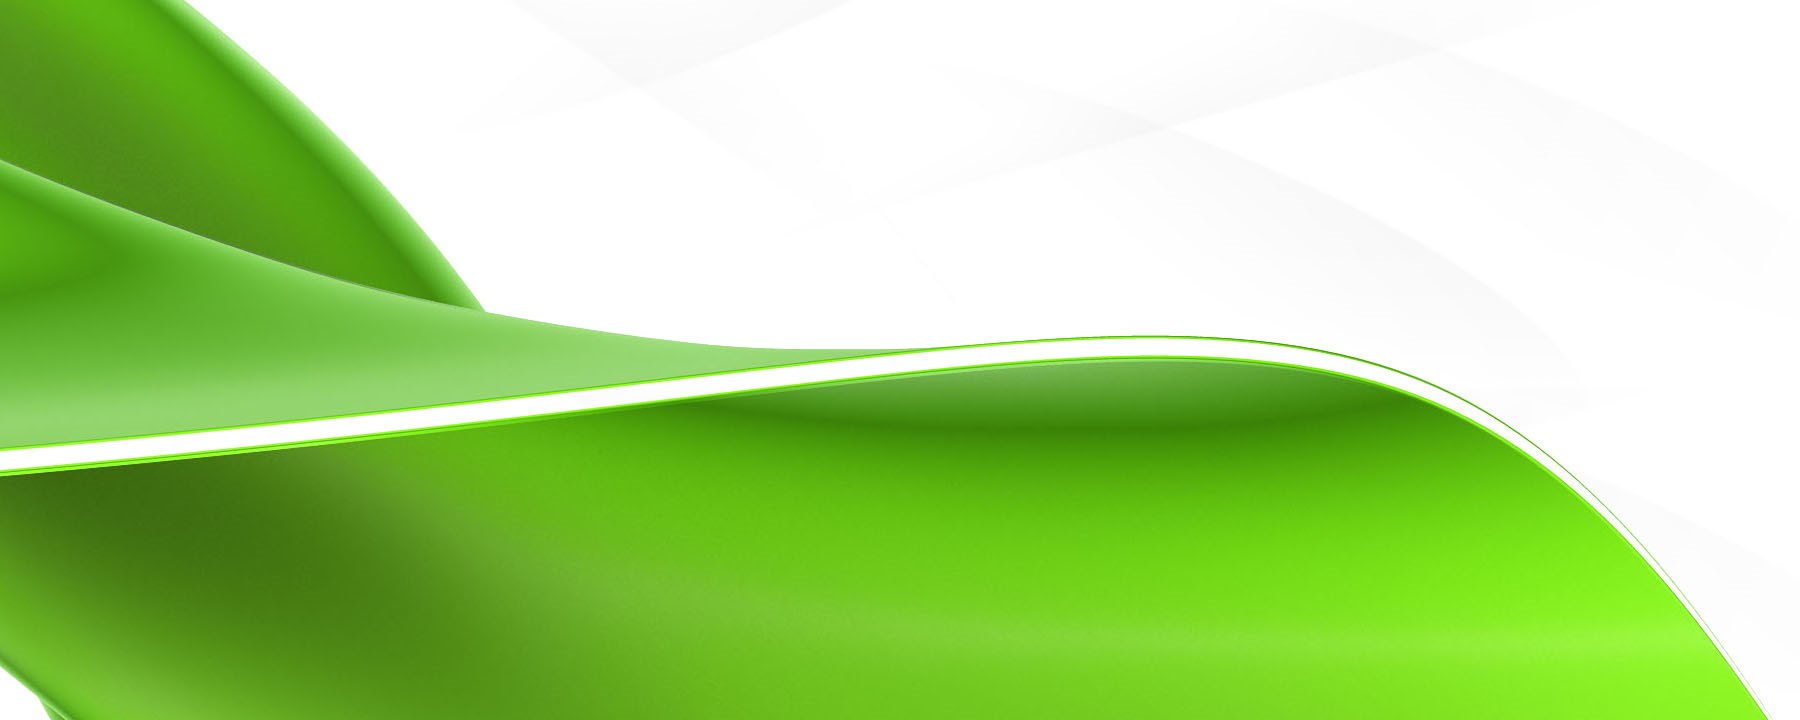 Banner Green Graphic